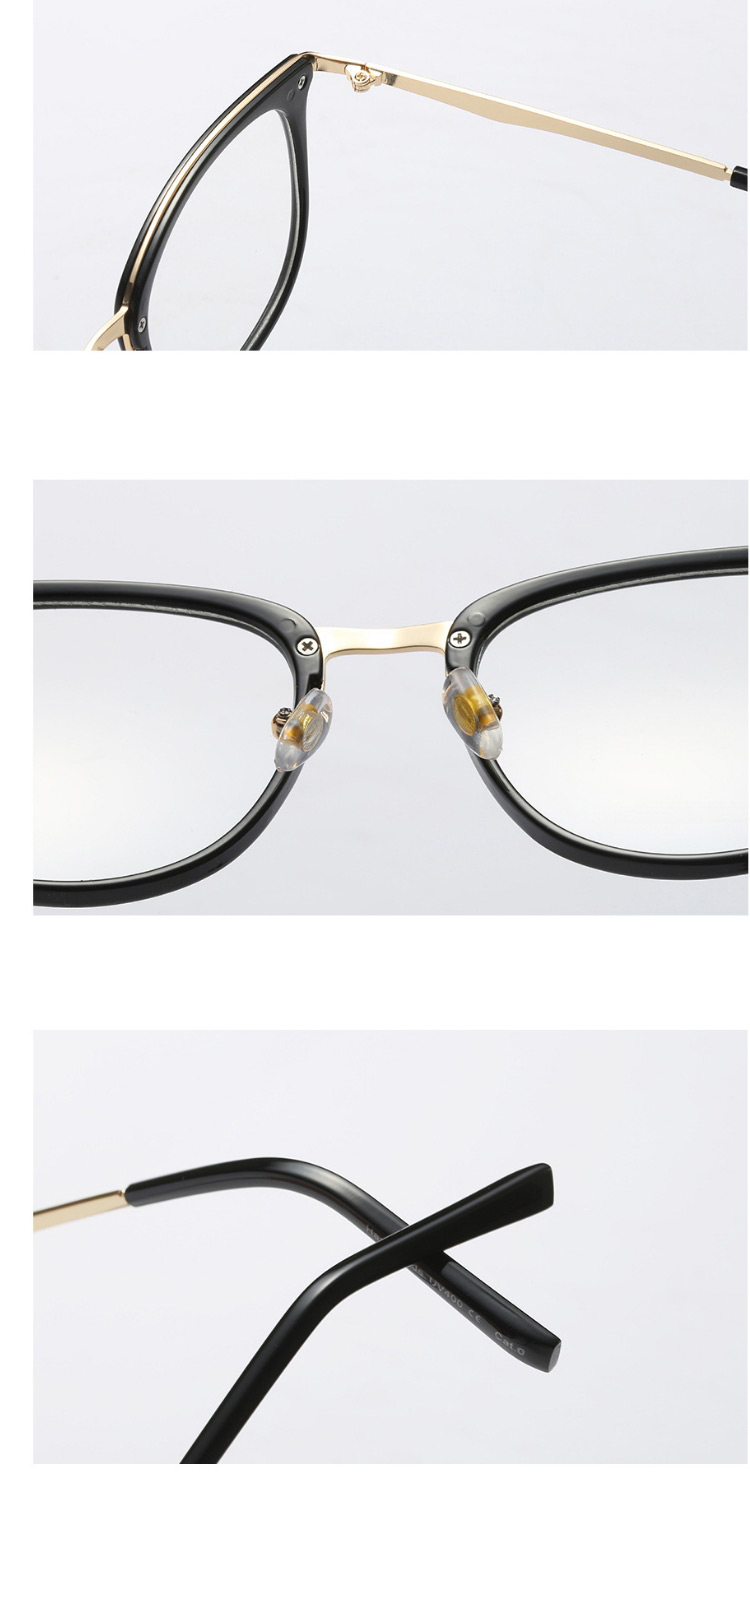 Fashion C4 Bright Black/transparent Ultra-light Can Be Equipped With Myopia Round Frame,Fashion Glasses